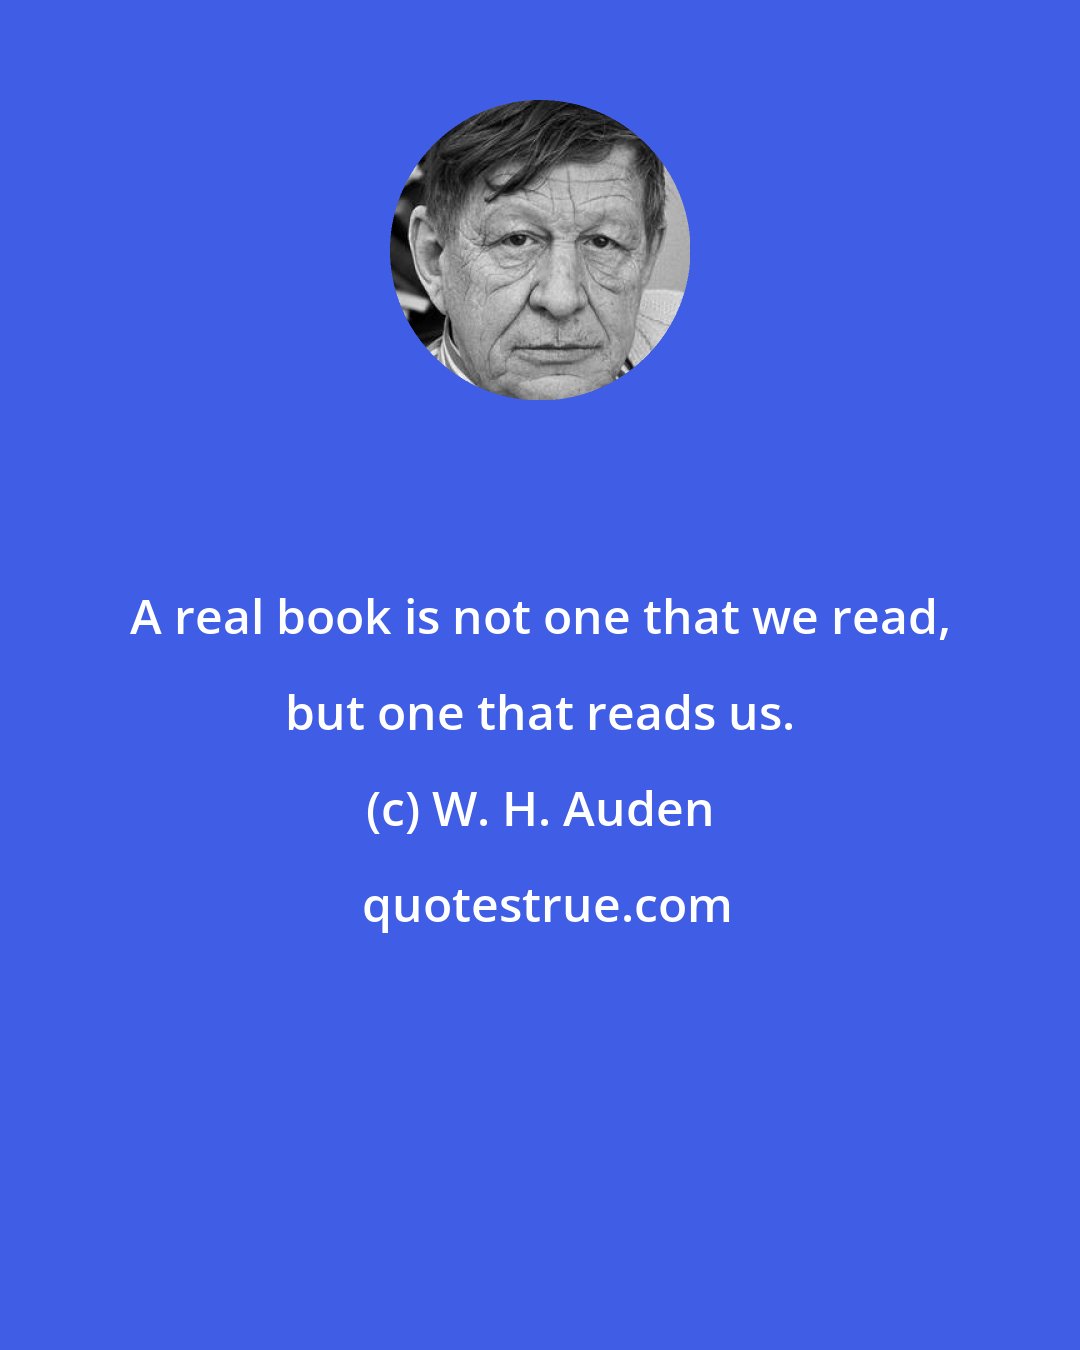 W. H. Auden: A real book is not one that we read, but one that reads us.